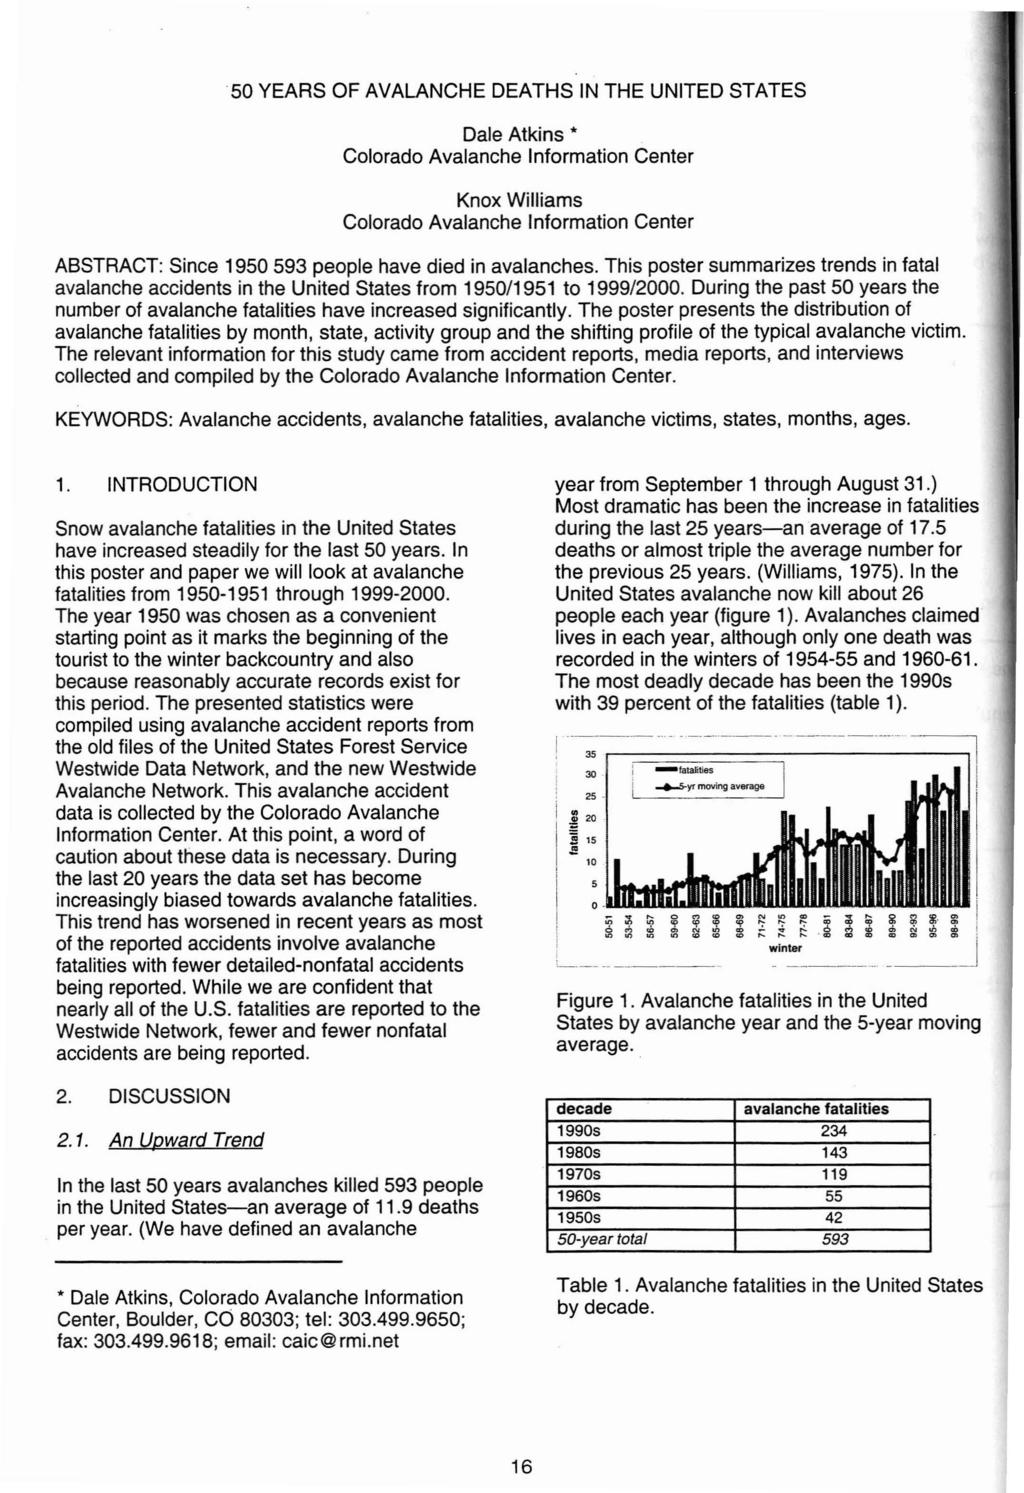 50 YEARS OF AVALANCHE DEATHS N THE UNTED STATES Dale Atkins * Colorado Avalanche nformation Center Knox Williams Colorado Avalanche nformation Center ABSTRACT: Since 1950593 people have died in